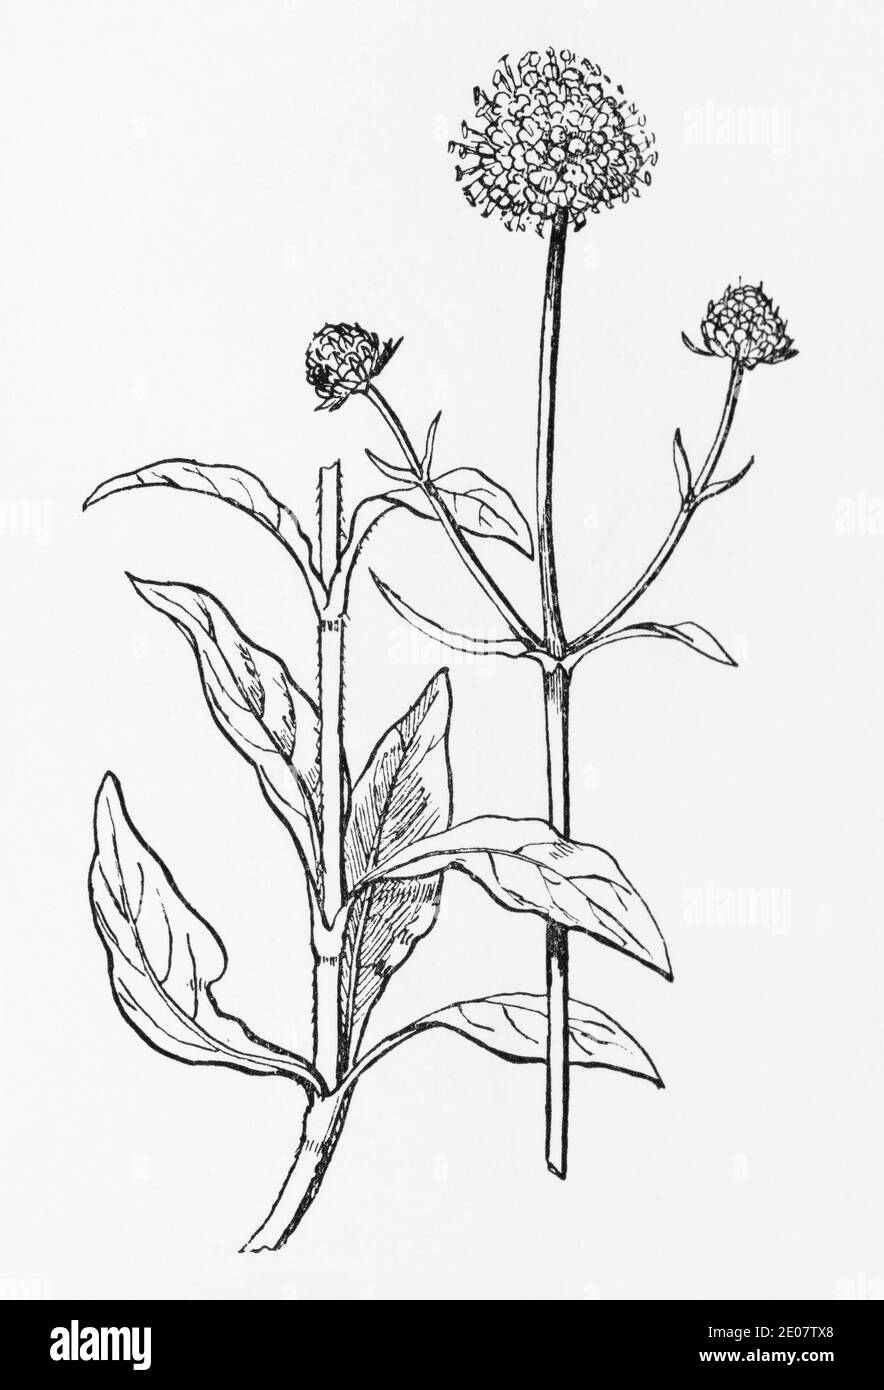 Old botanical illustration engraving of Devil's Bit Scabious / Succisa pratensis, Scabiosa succisa. Traditional medicinal herbal plant. See Notes Stock Photo